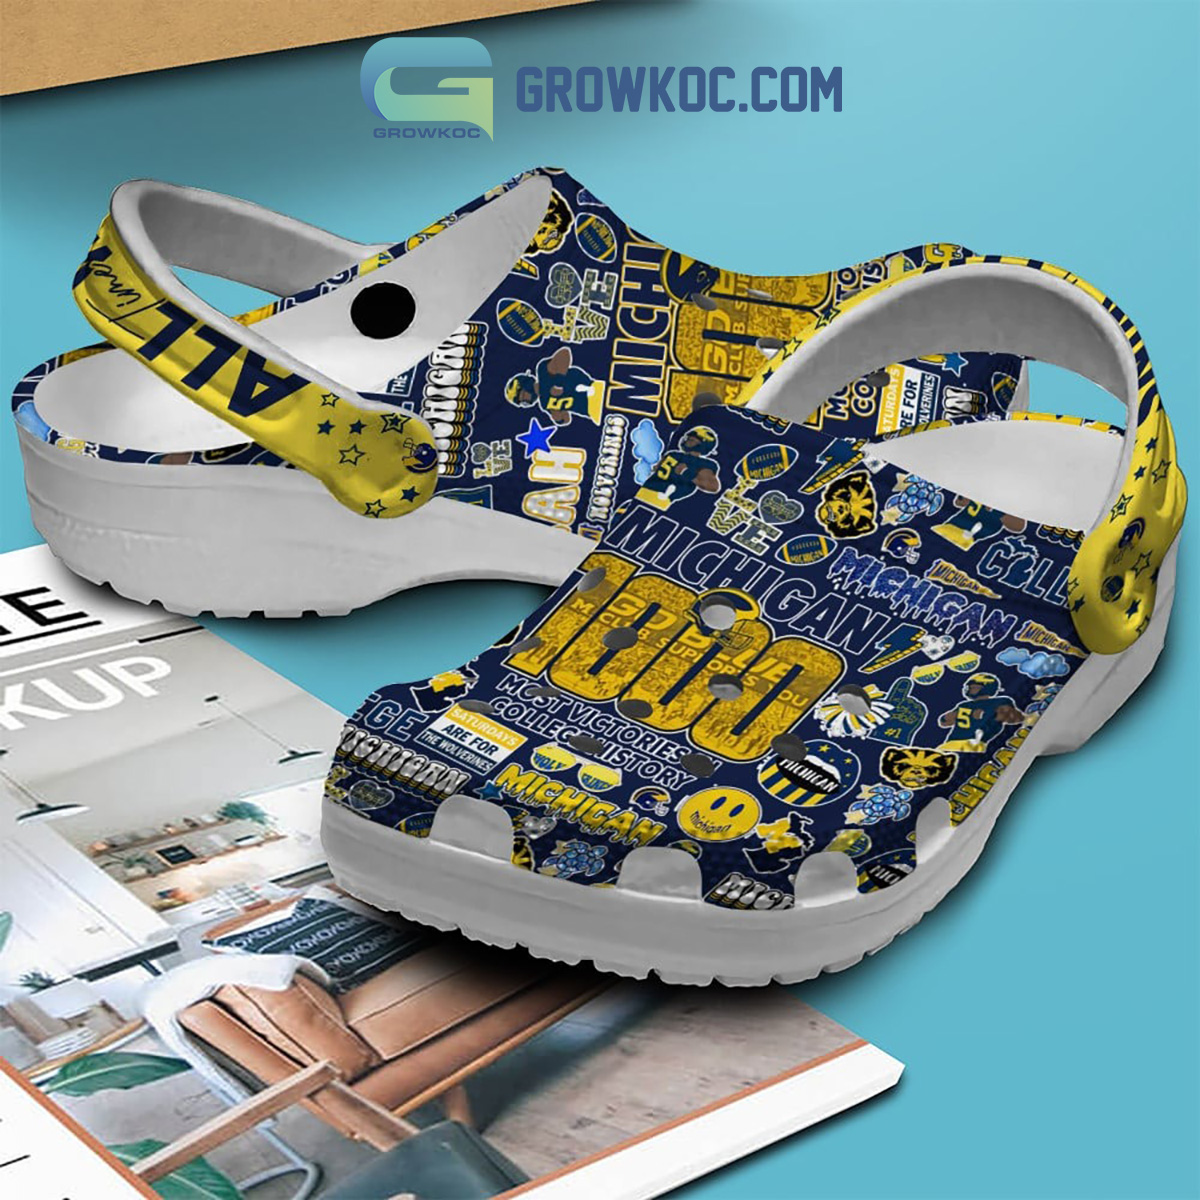 Michigan Wolverines 1000 Victories In History Crocs Clogs